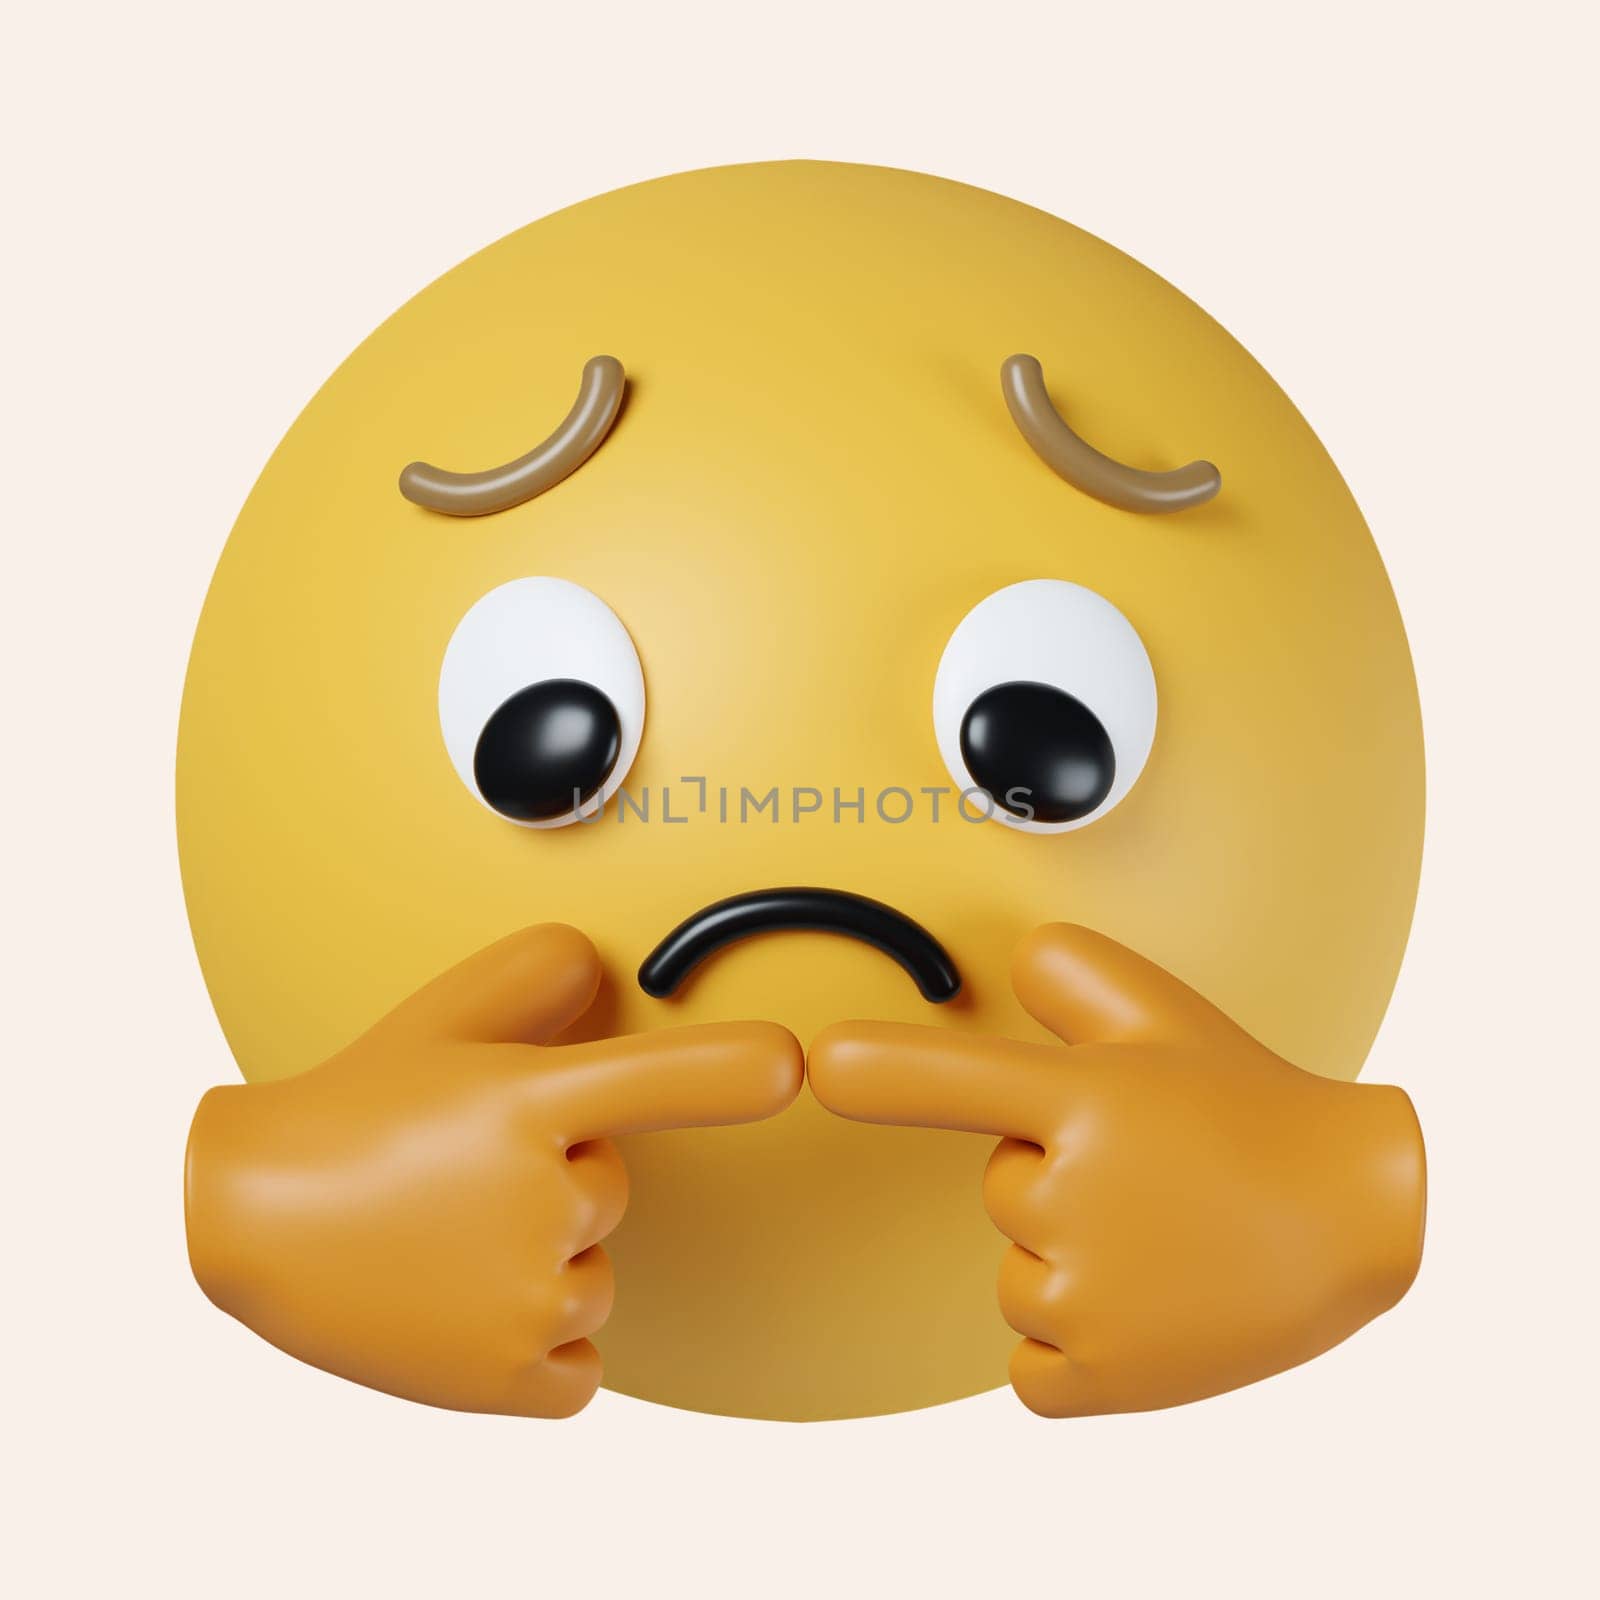 3d emoji Sorry Emoticon Face with hand. icon isolated on gray background. 3d rendering illustration. Clipping path..